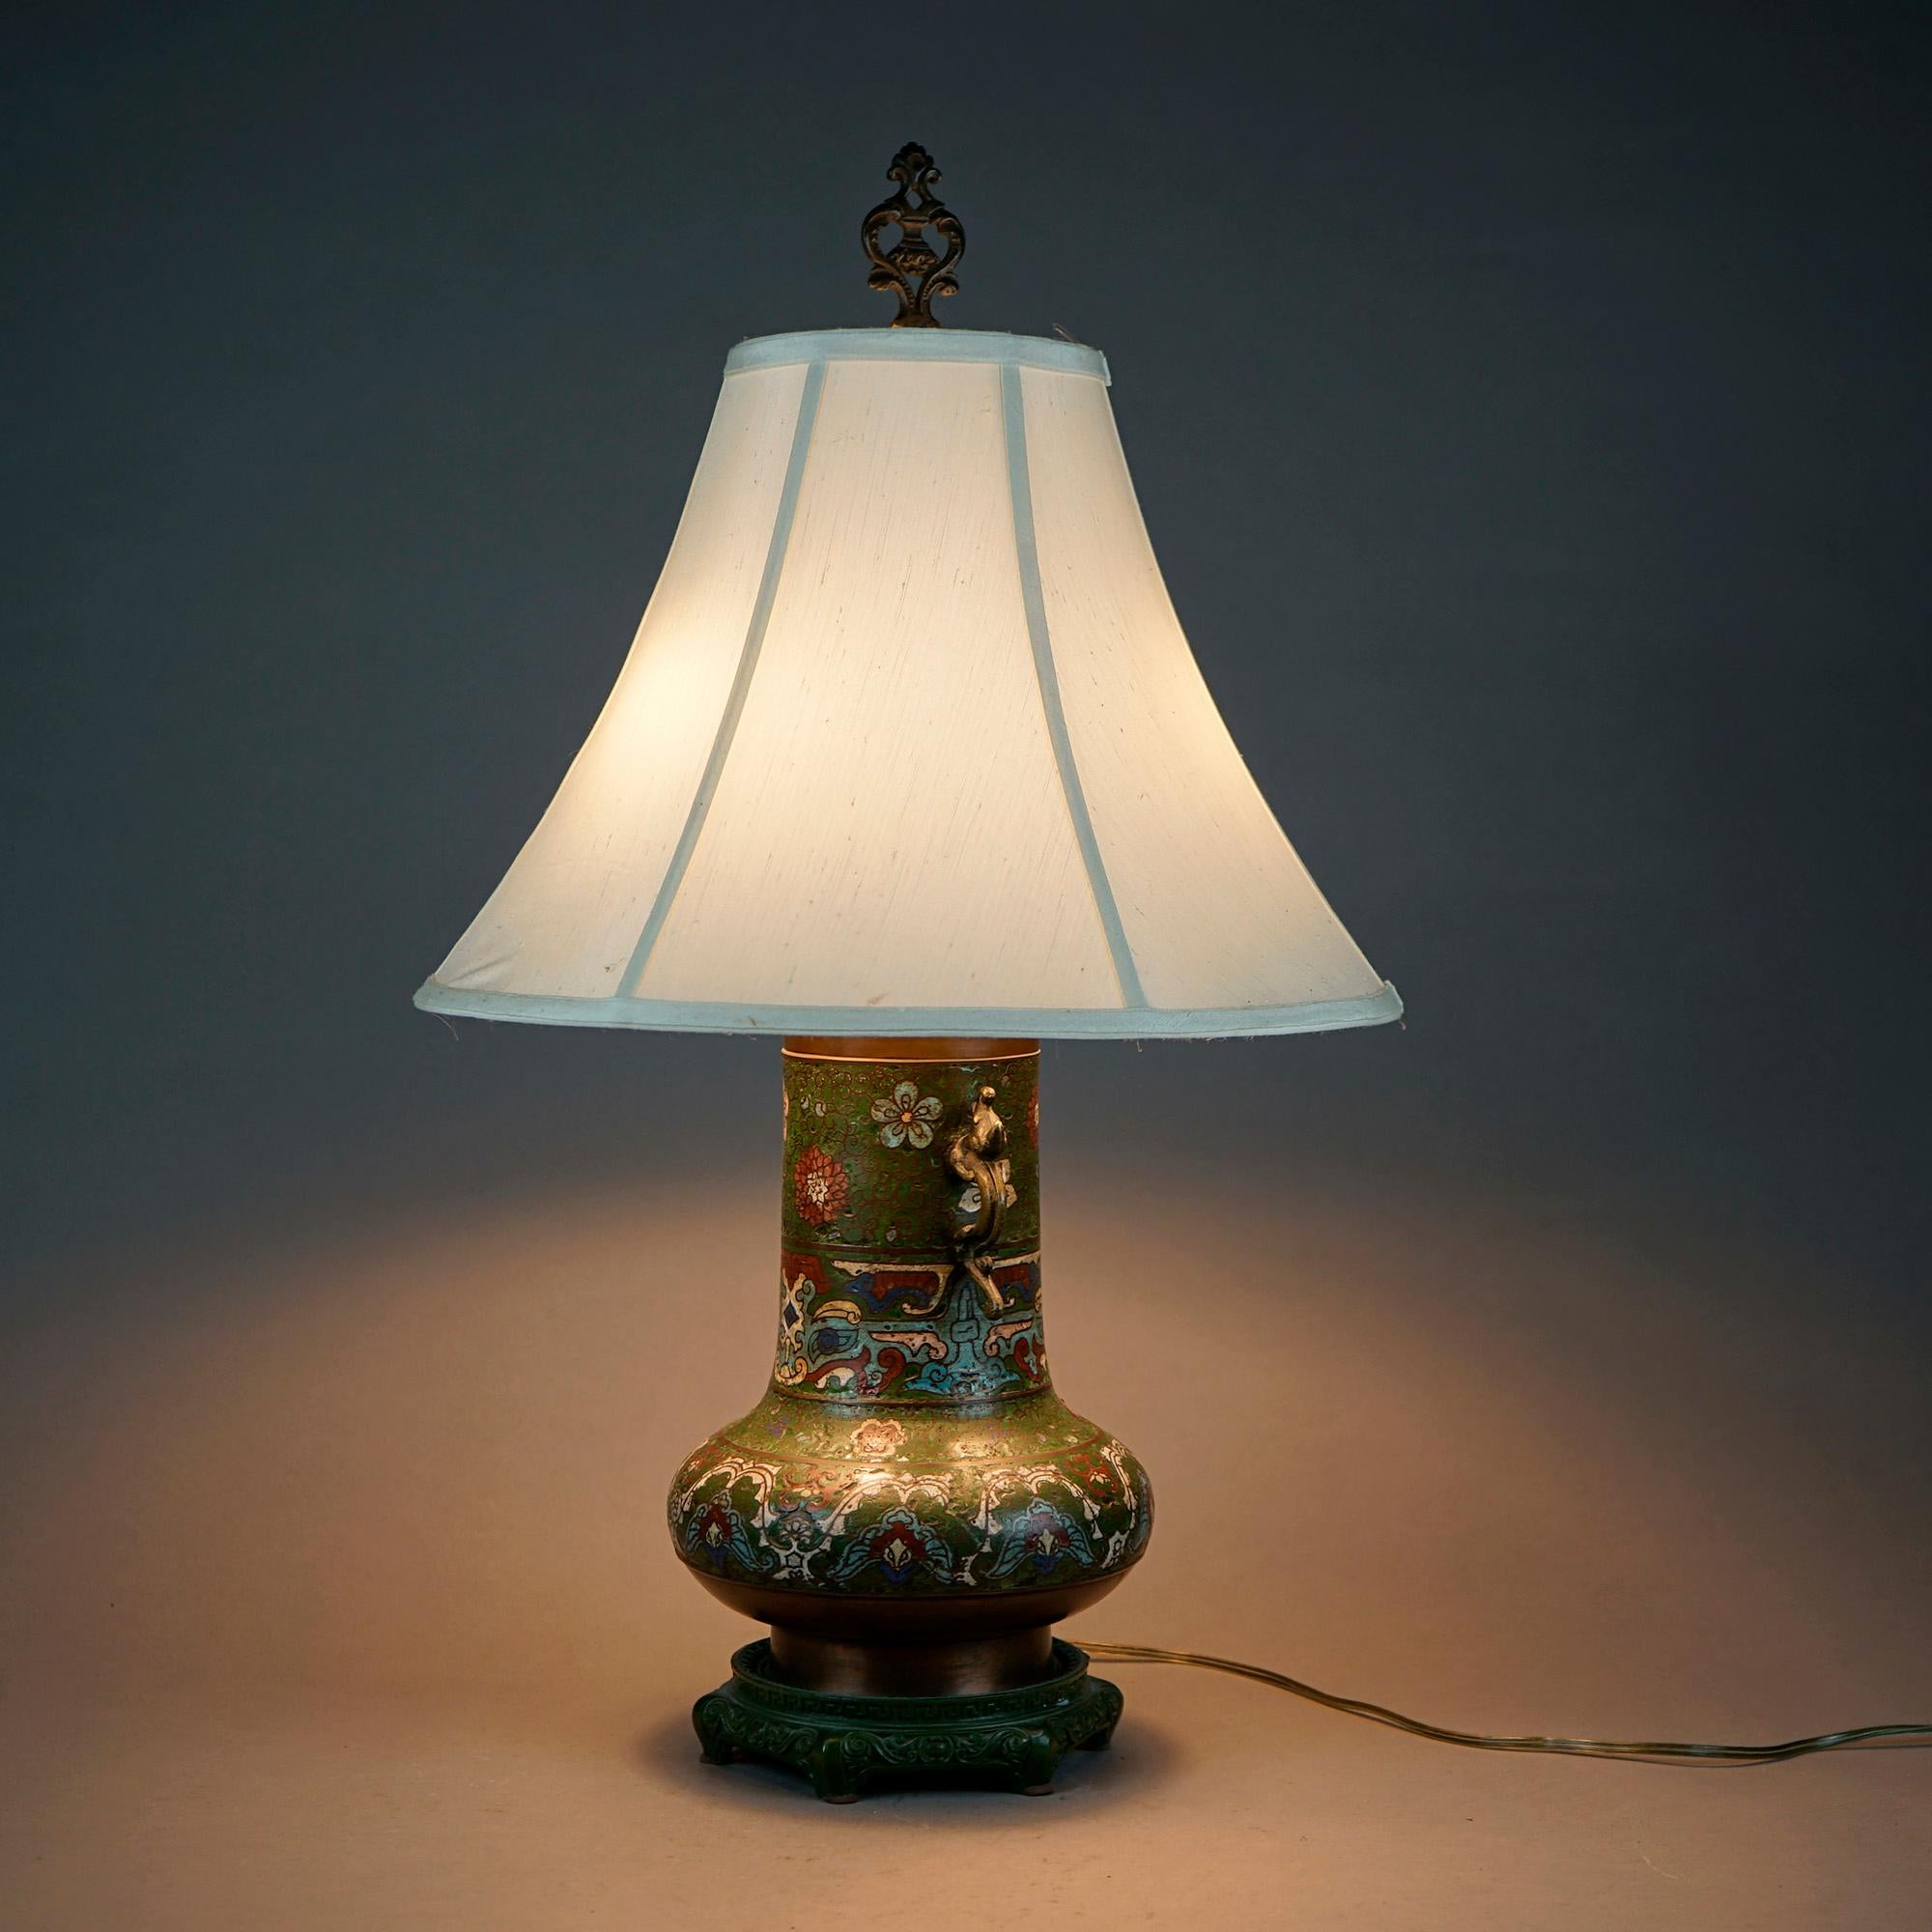 Chinese Antique Cloissone Enameled Figural Garden Scene Table Lamp Circa 1920 For Sale